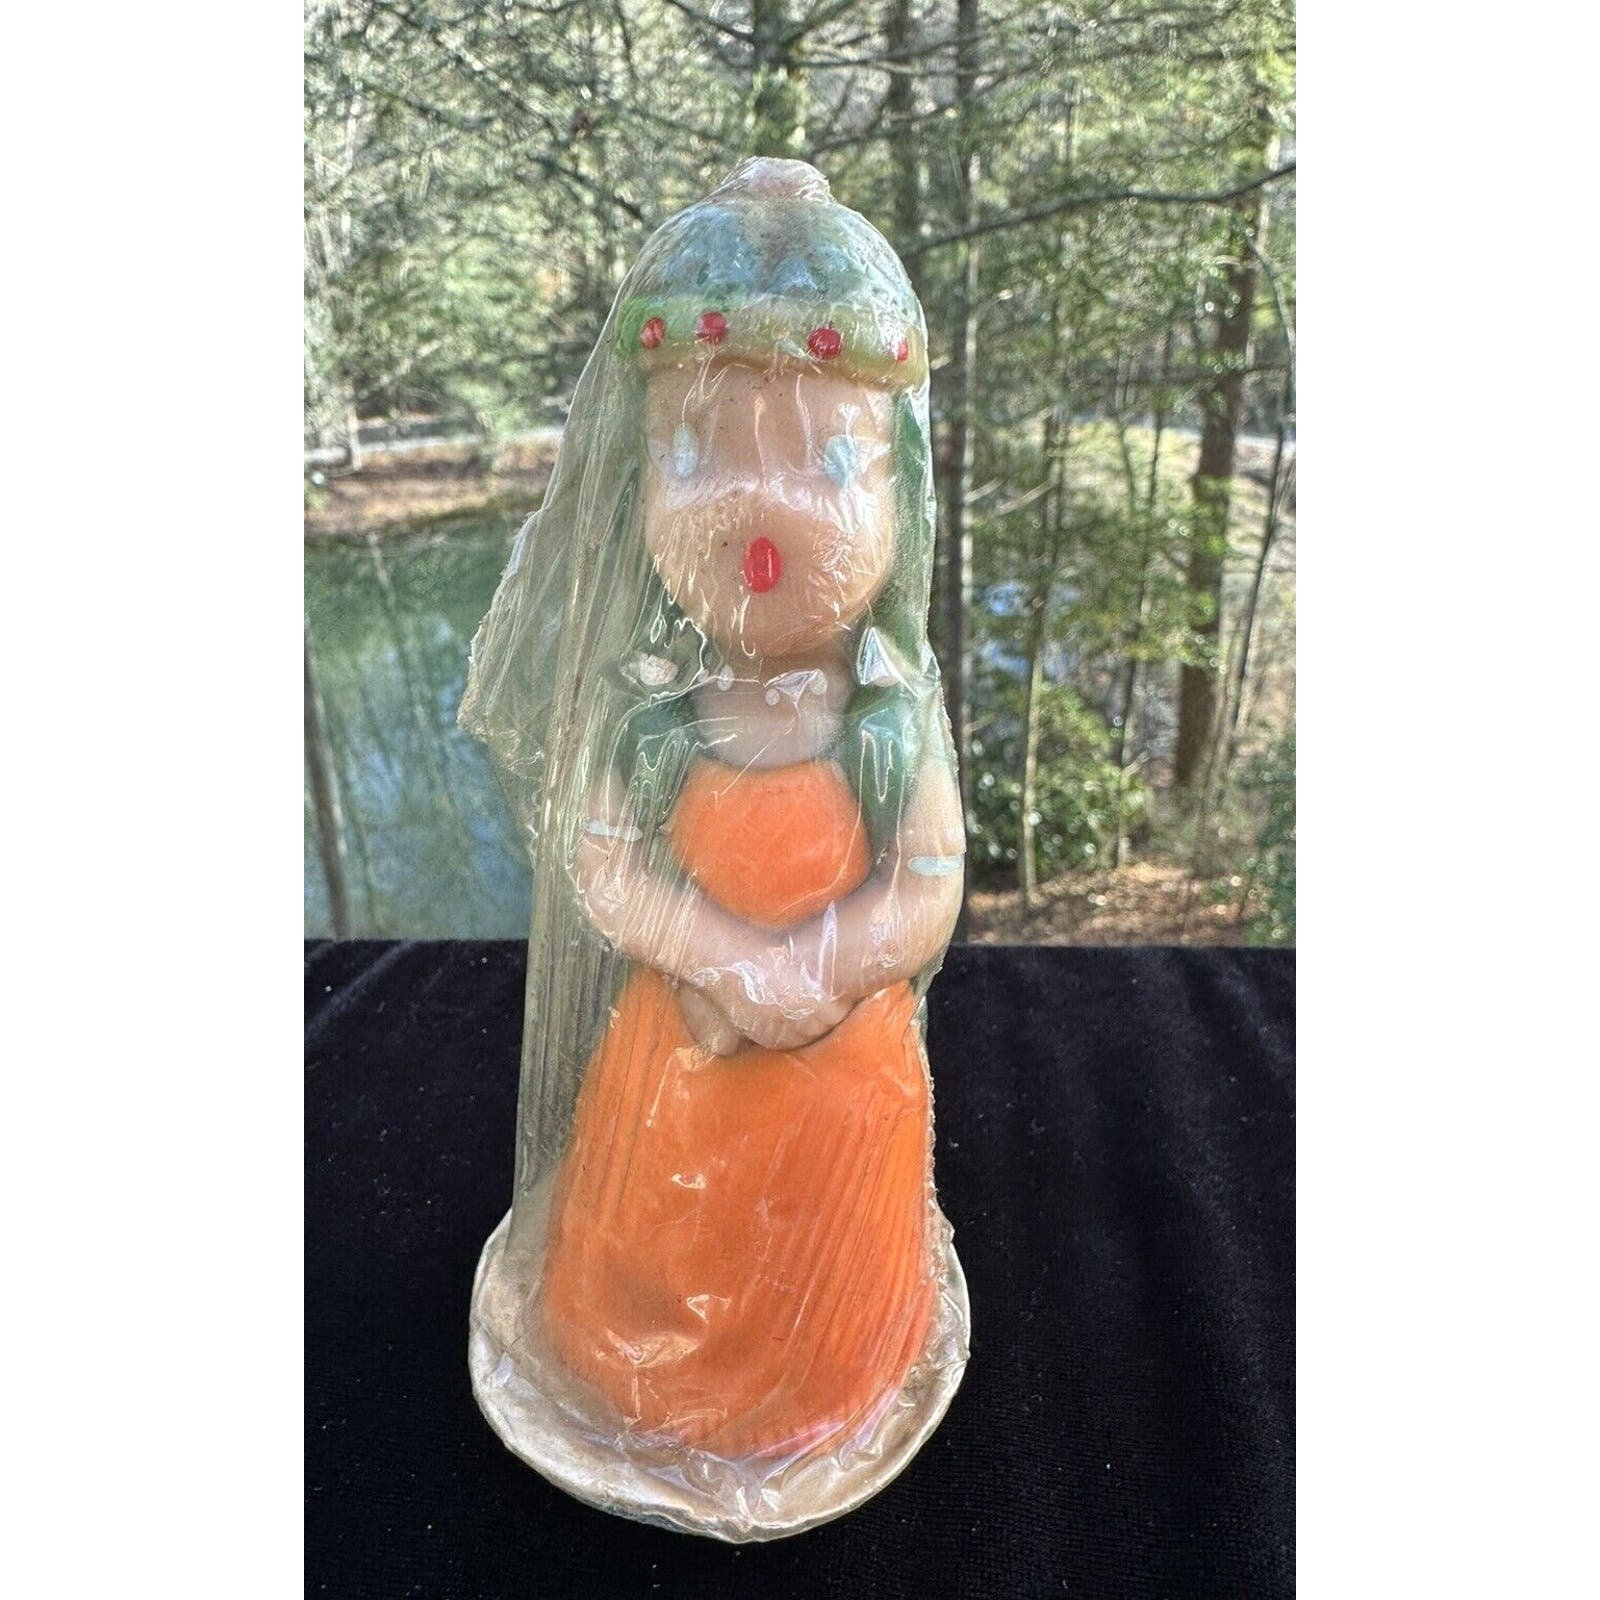 Unused 5.5” Gurley Thanksgiving Indian Candle Wrapped In Plastic Rare! -S94 jXWvw718X